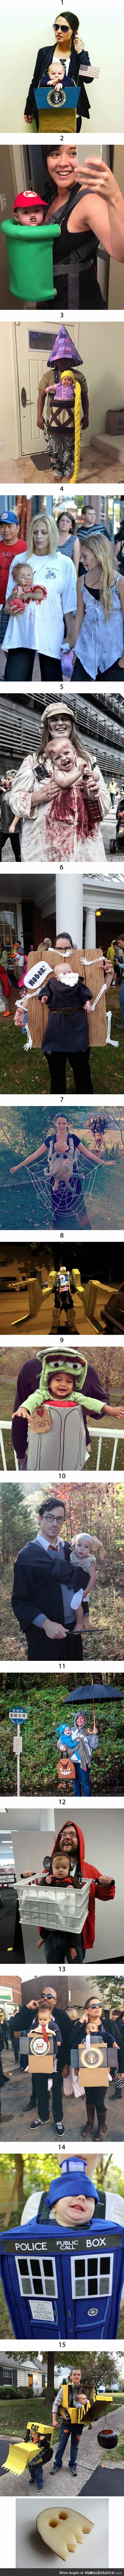 15+ parents with prize-winning costumes that will conquer halloween